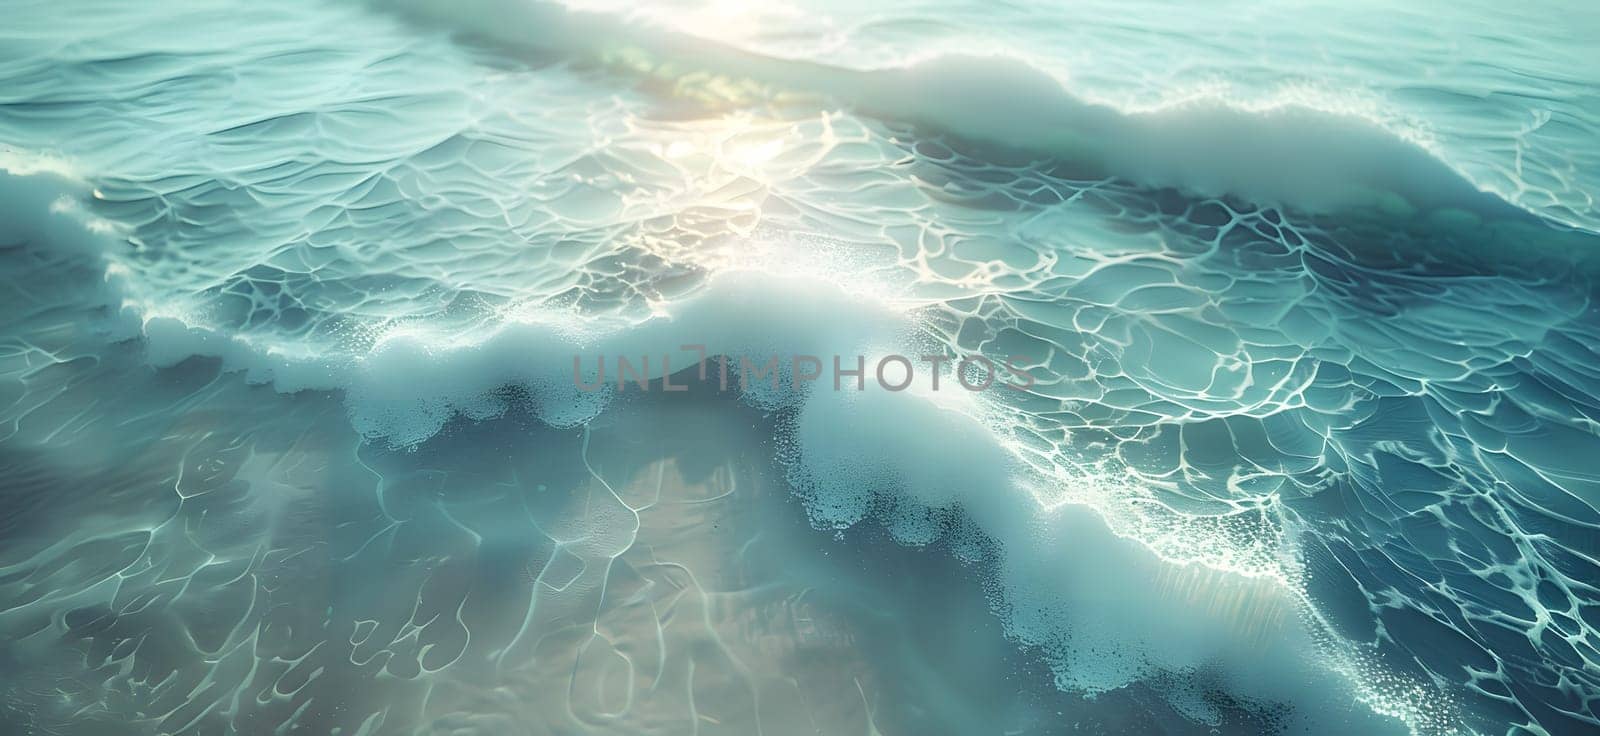 The sunlight filters through the liquid waves of the ocean, creating a mesmerizing display of natural beauty in this marine biological landscape